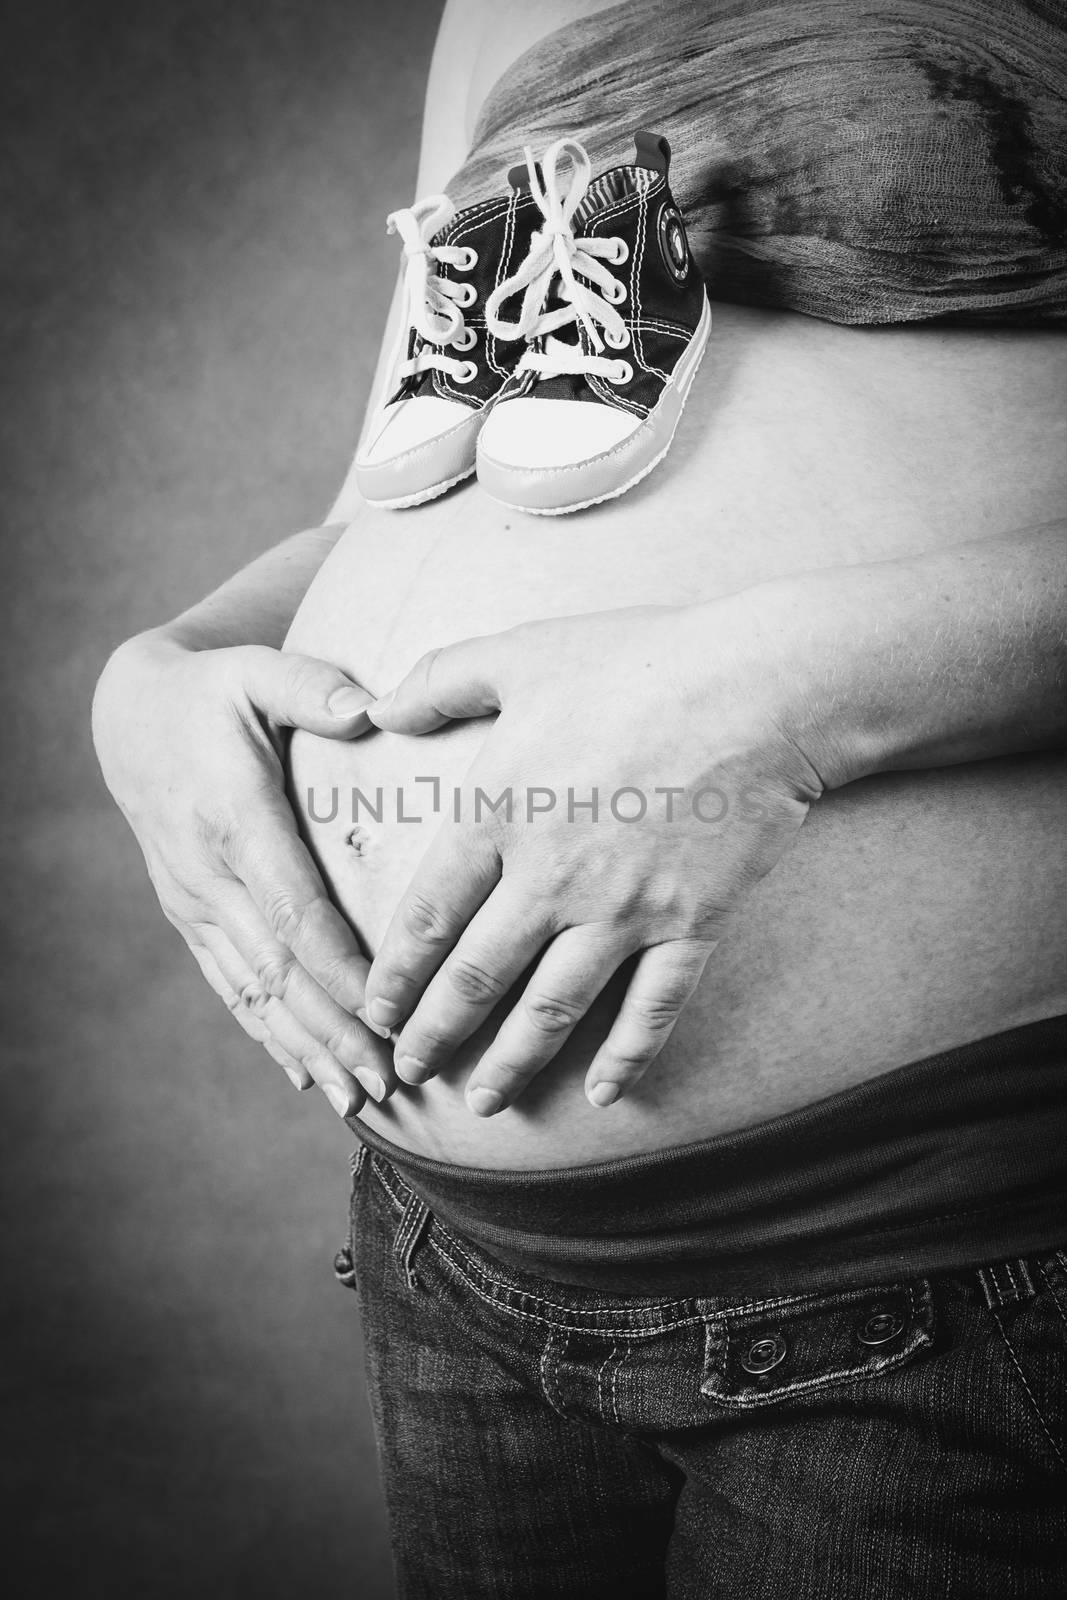 pregnant woman with a child shoe tenderly holding her tummy with hand as heart shape